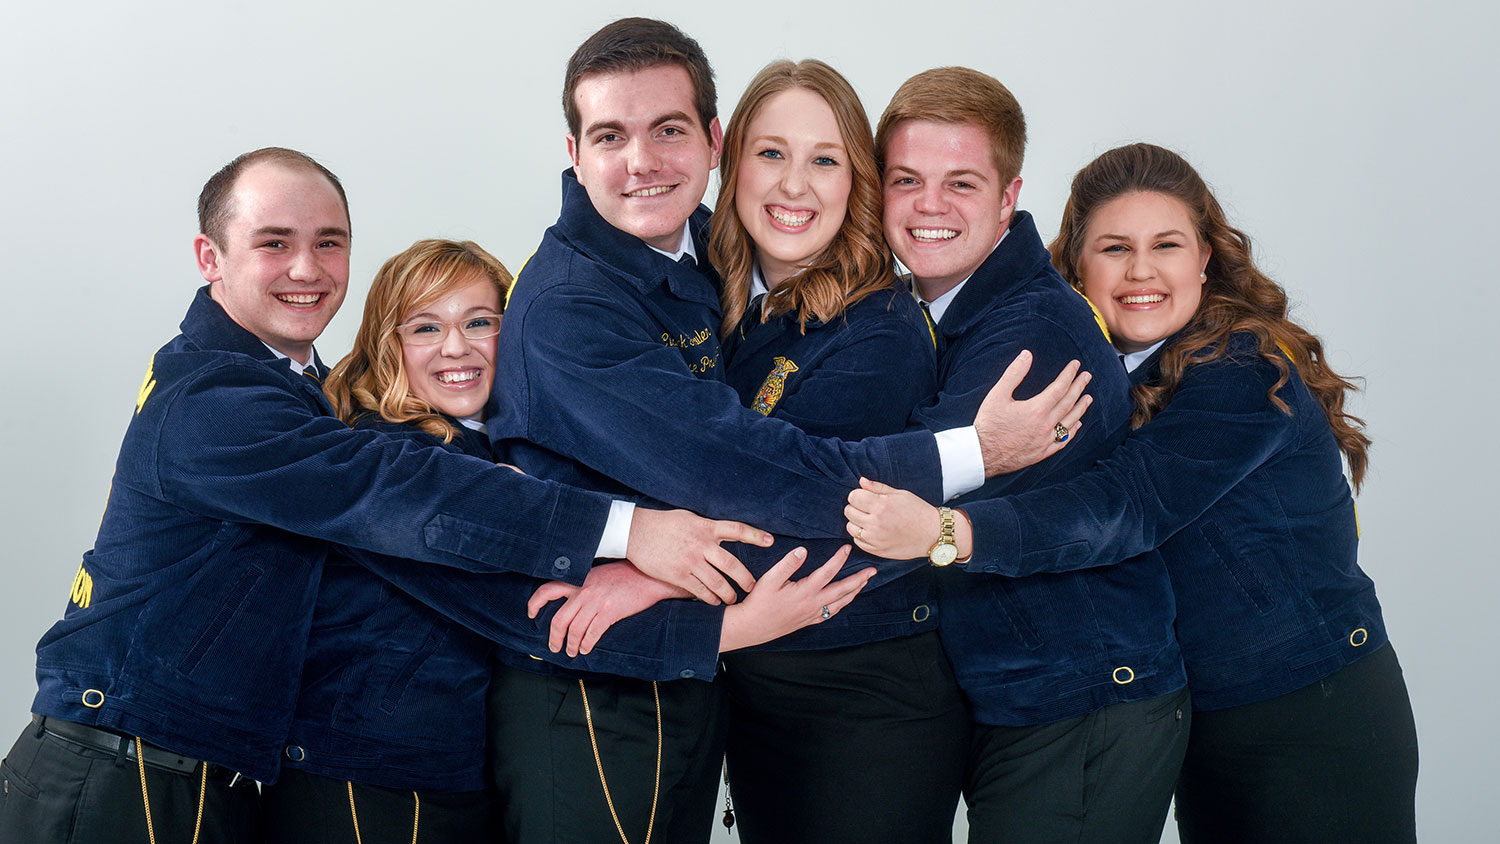 Portrait of state FFA officers